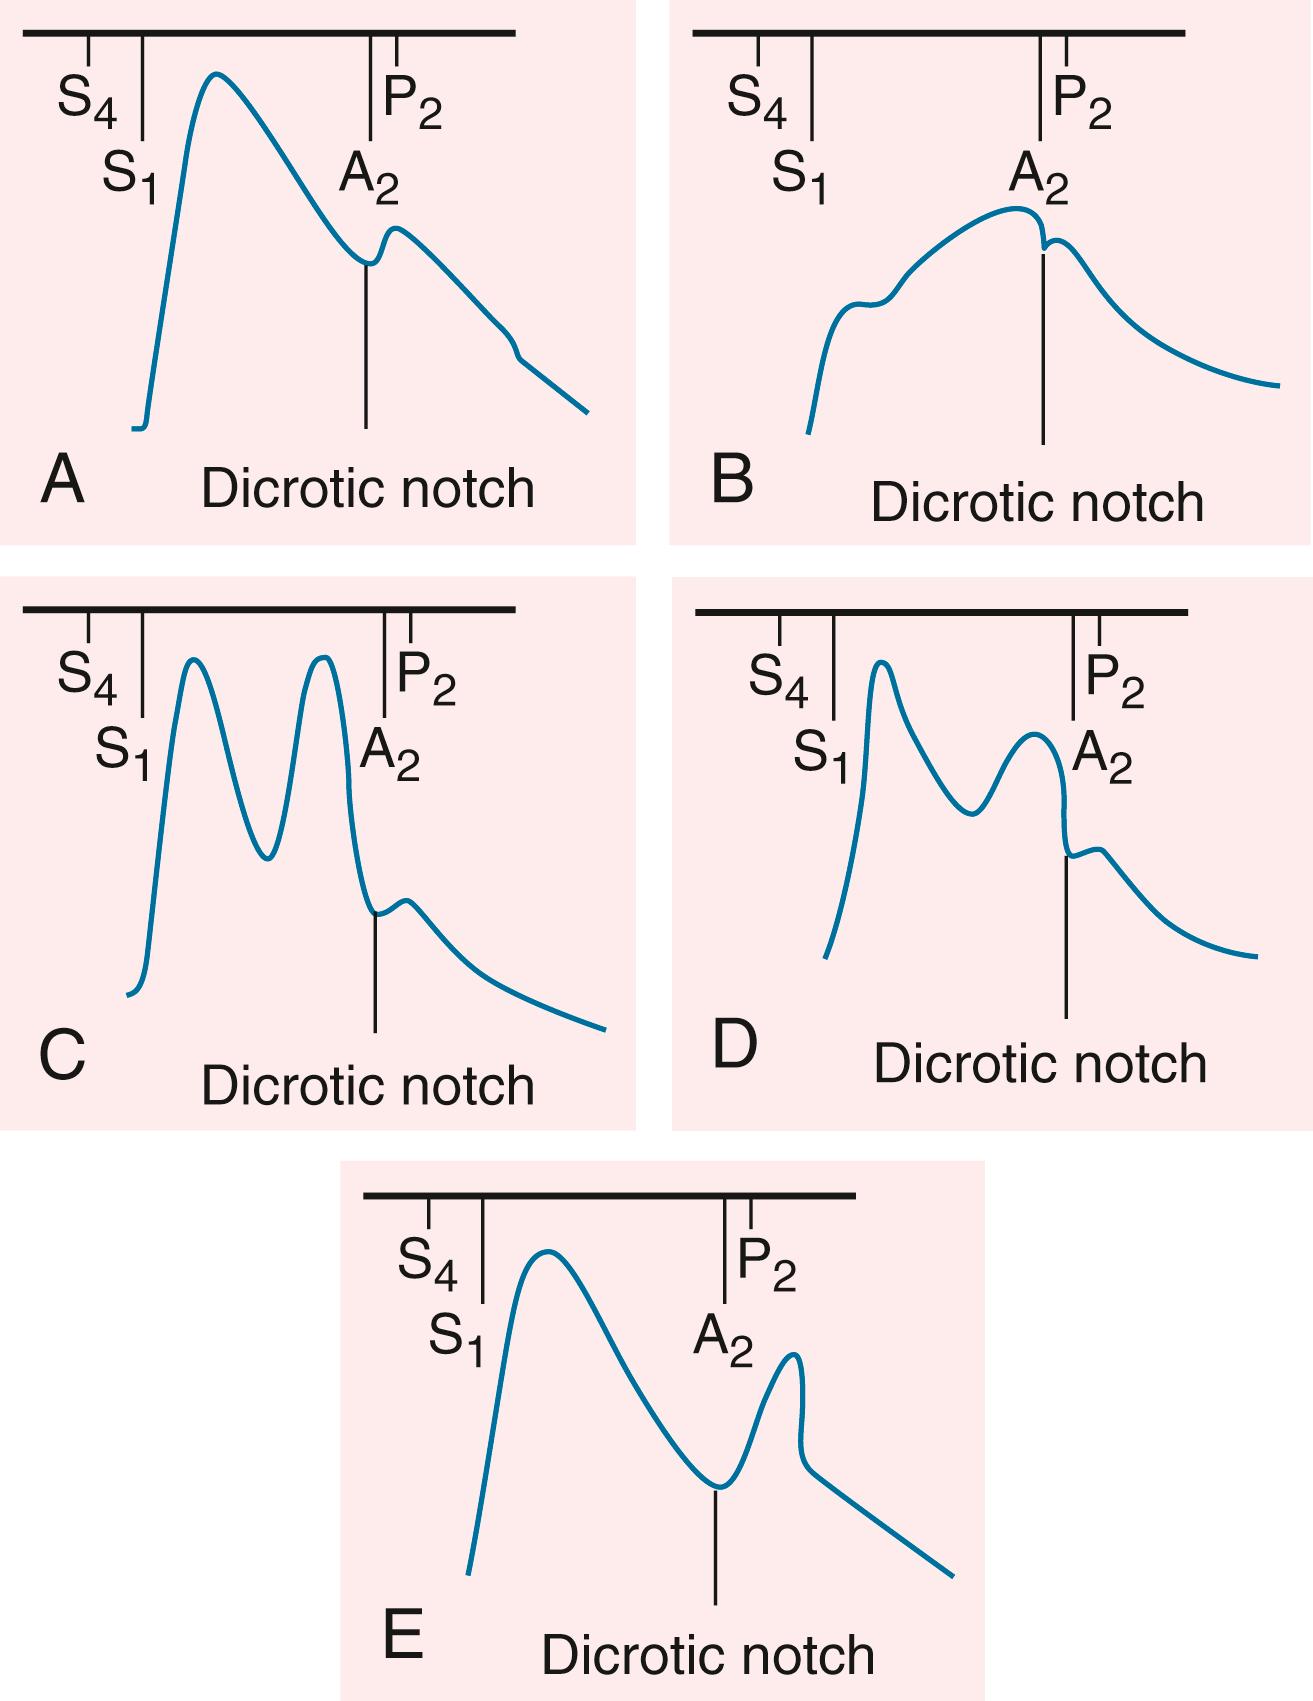 FIGURE 13.4, Carotid pulse waveforms and heart sounds. A, Normal. B, Aortic stenosis. Anacrotic pulse with slow upstroke and peak near S 2 . C, Severe aortic regurgitation (AR): bifid pulse with two systolic peaks. D, Hypertrophic obstructive cardiomyopathy (HCM): bifid pulse with two systolic peaks. The second peak (tidal or reflected wave) is of lower amplitude than the initial percussion wave. E, Bifid pulse with systolic and diastolic peaks as may occur with sepsis or intra-aortic balloon counterpulsation. A 2 , Aortic component of S 2 ; P 2 , pulmonic component of S 2 .